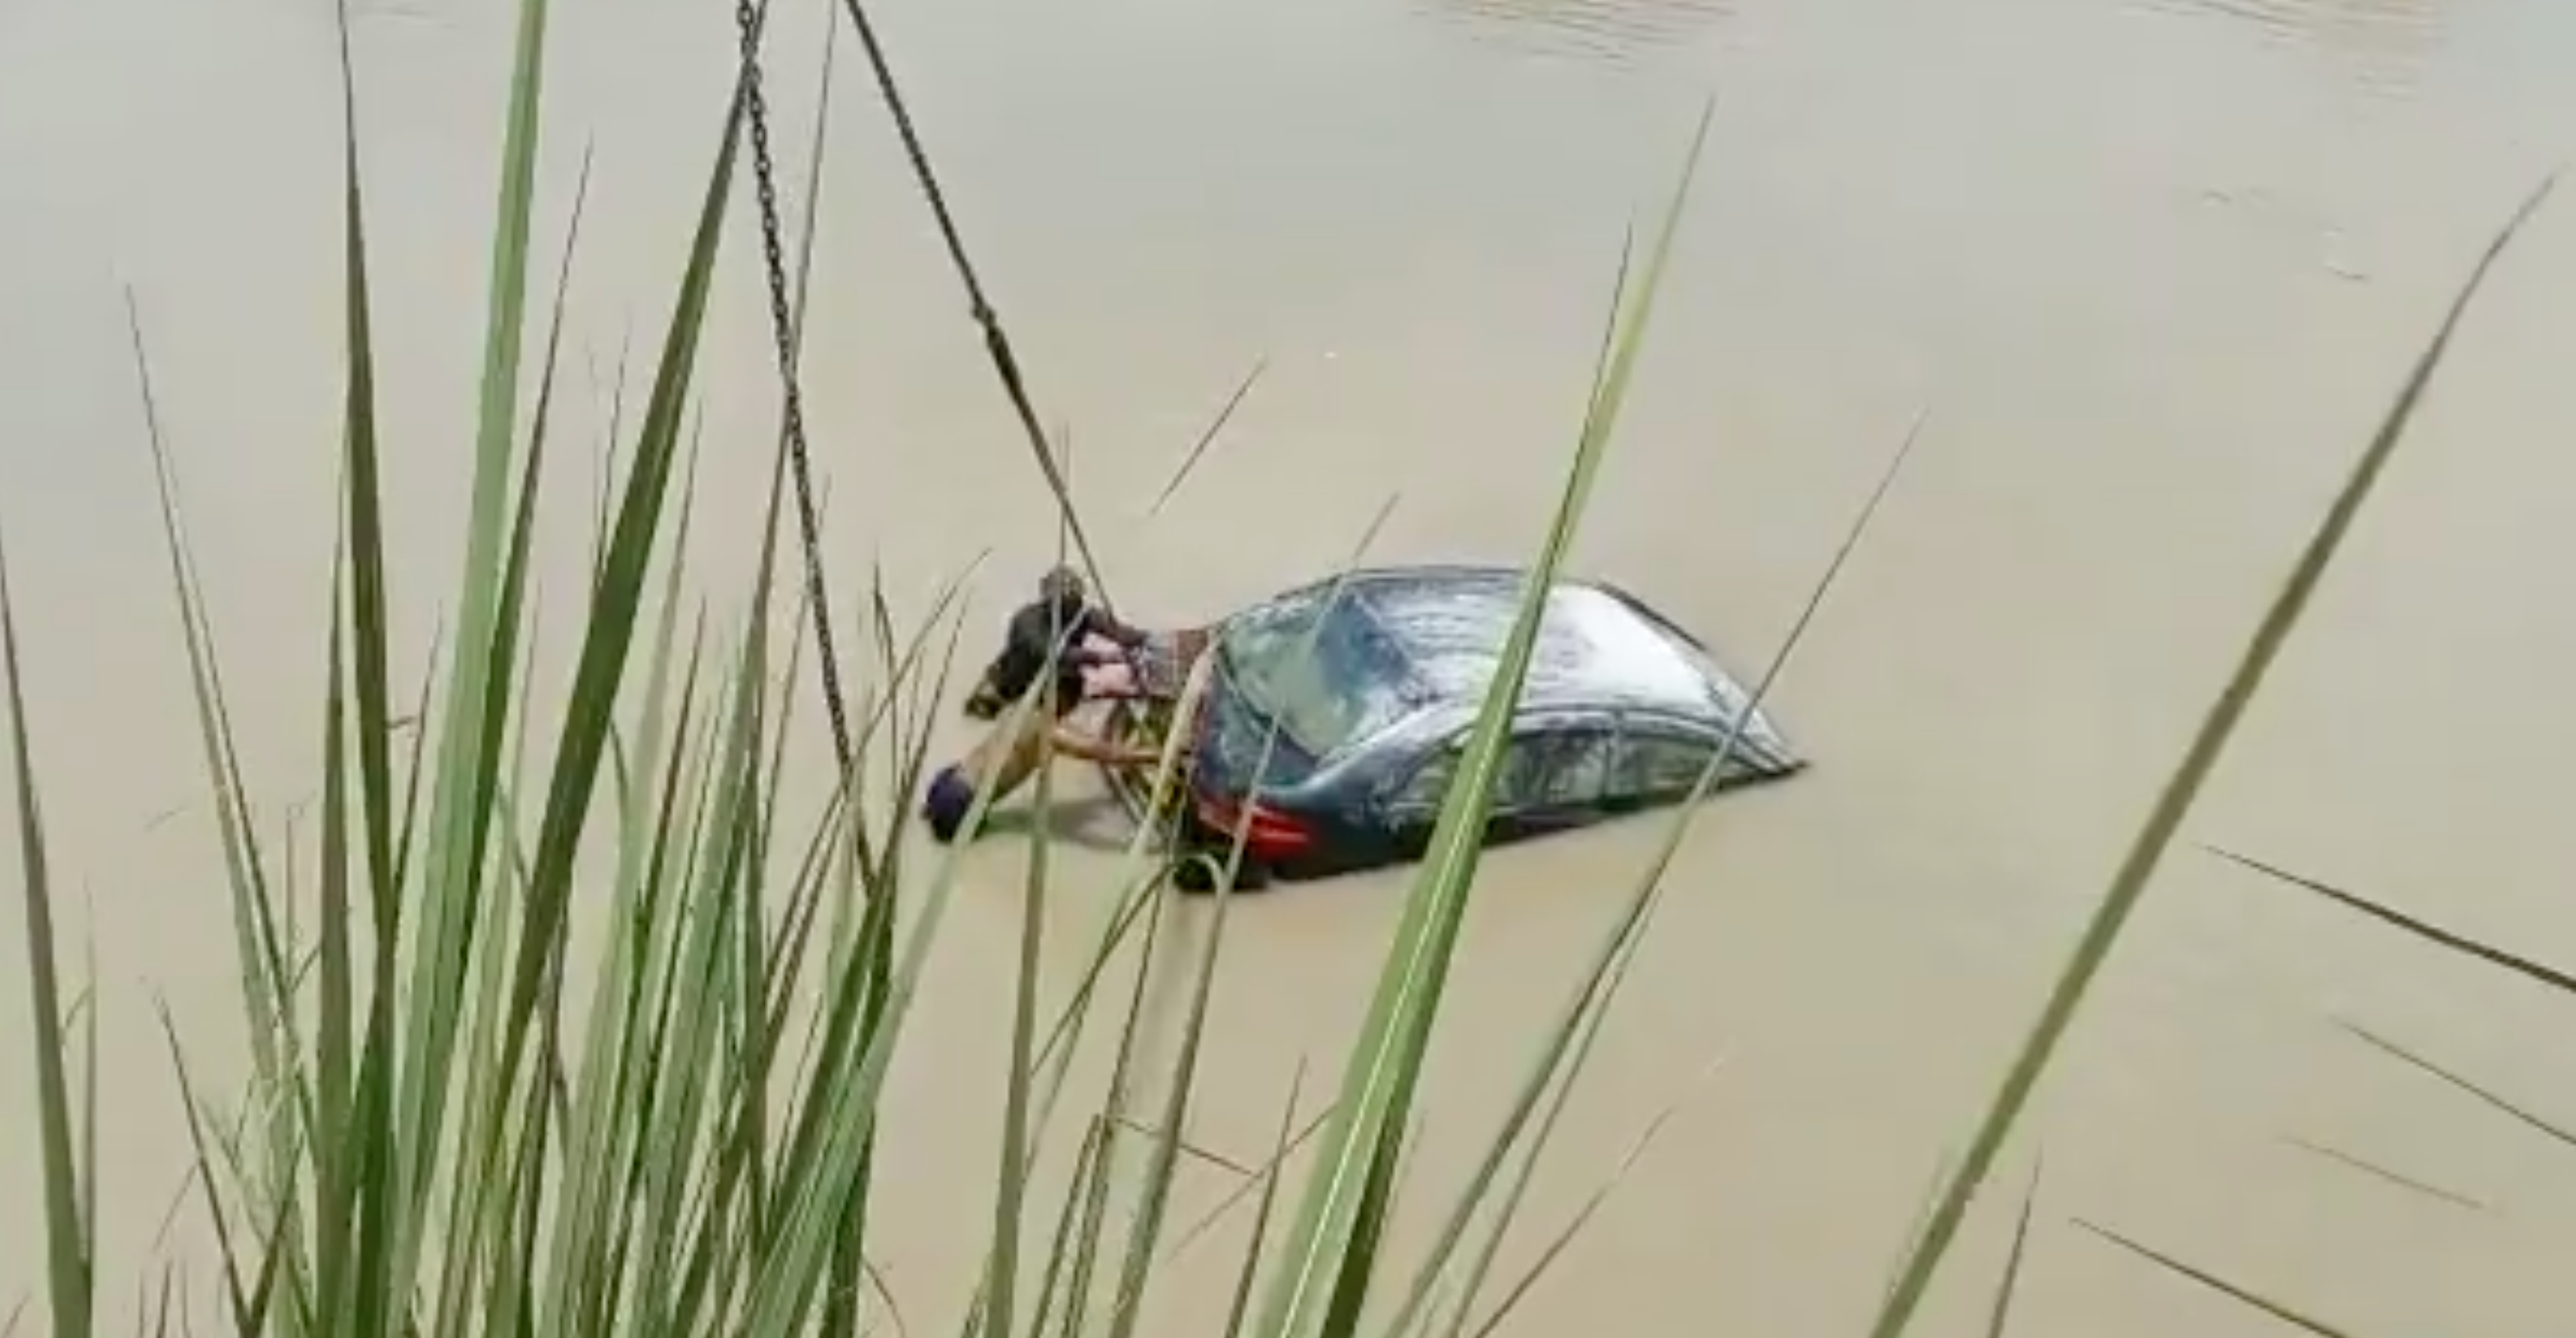 Screengrab from a video of a car being pulled out of the Ganges canal in India’s Uttar Pradesh state